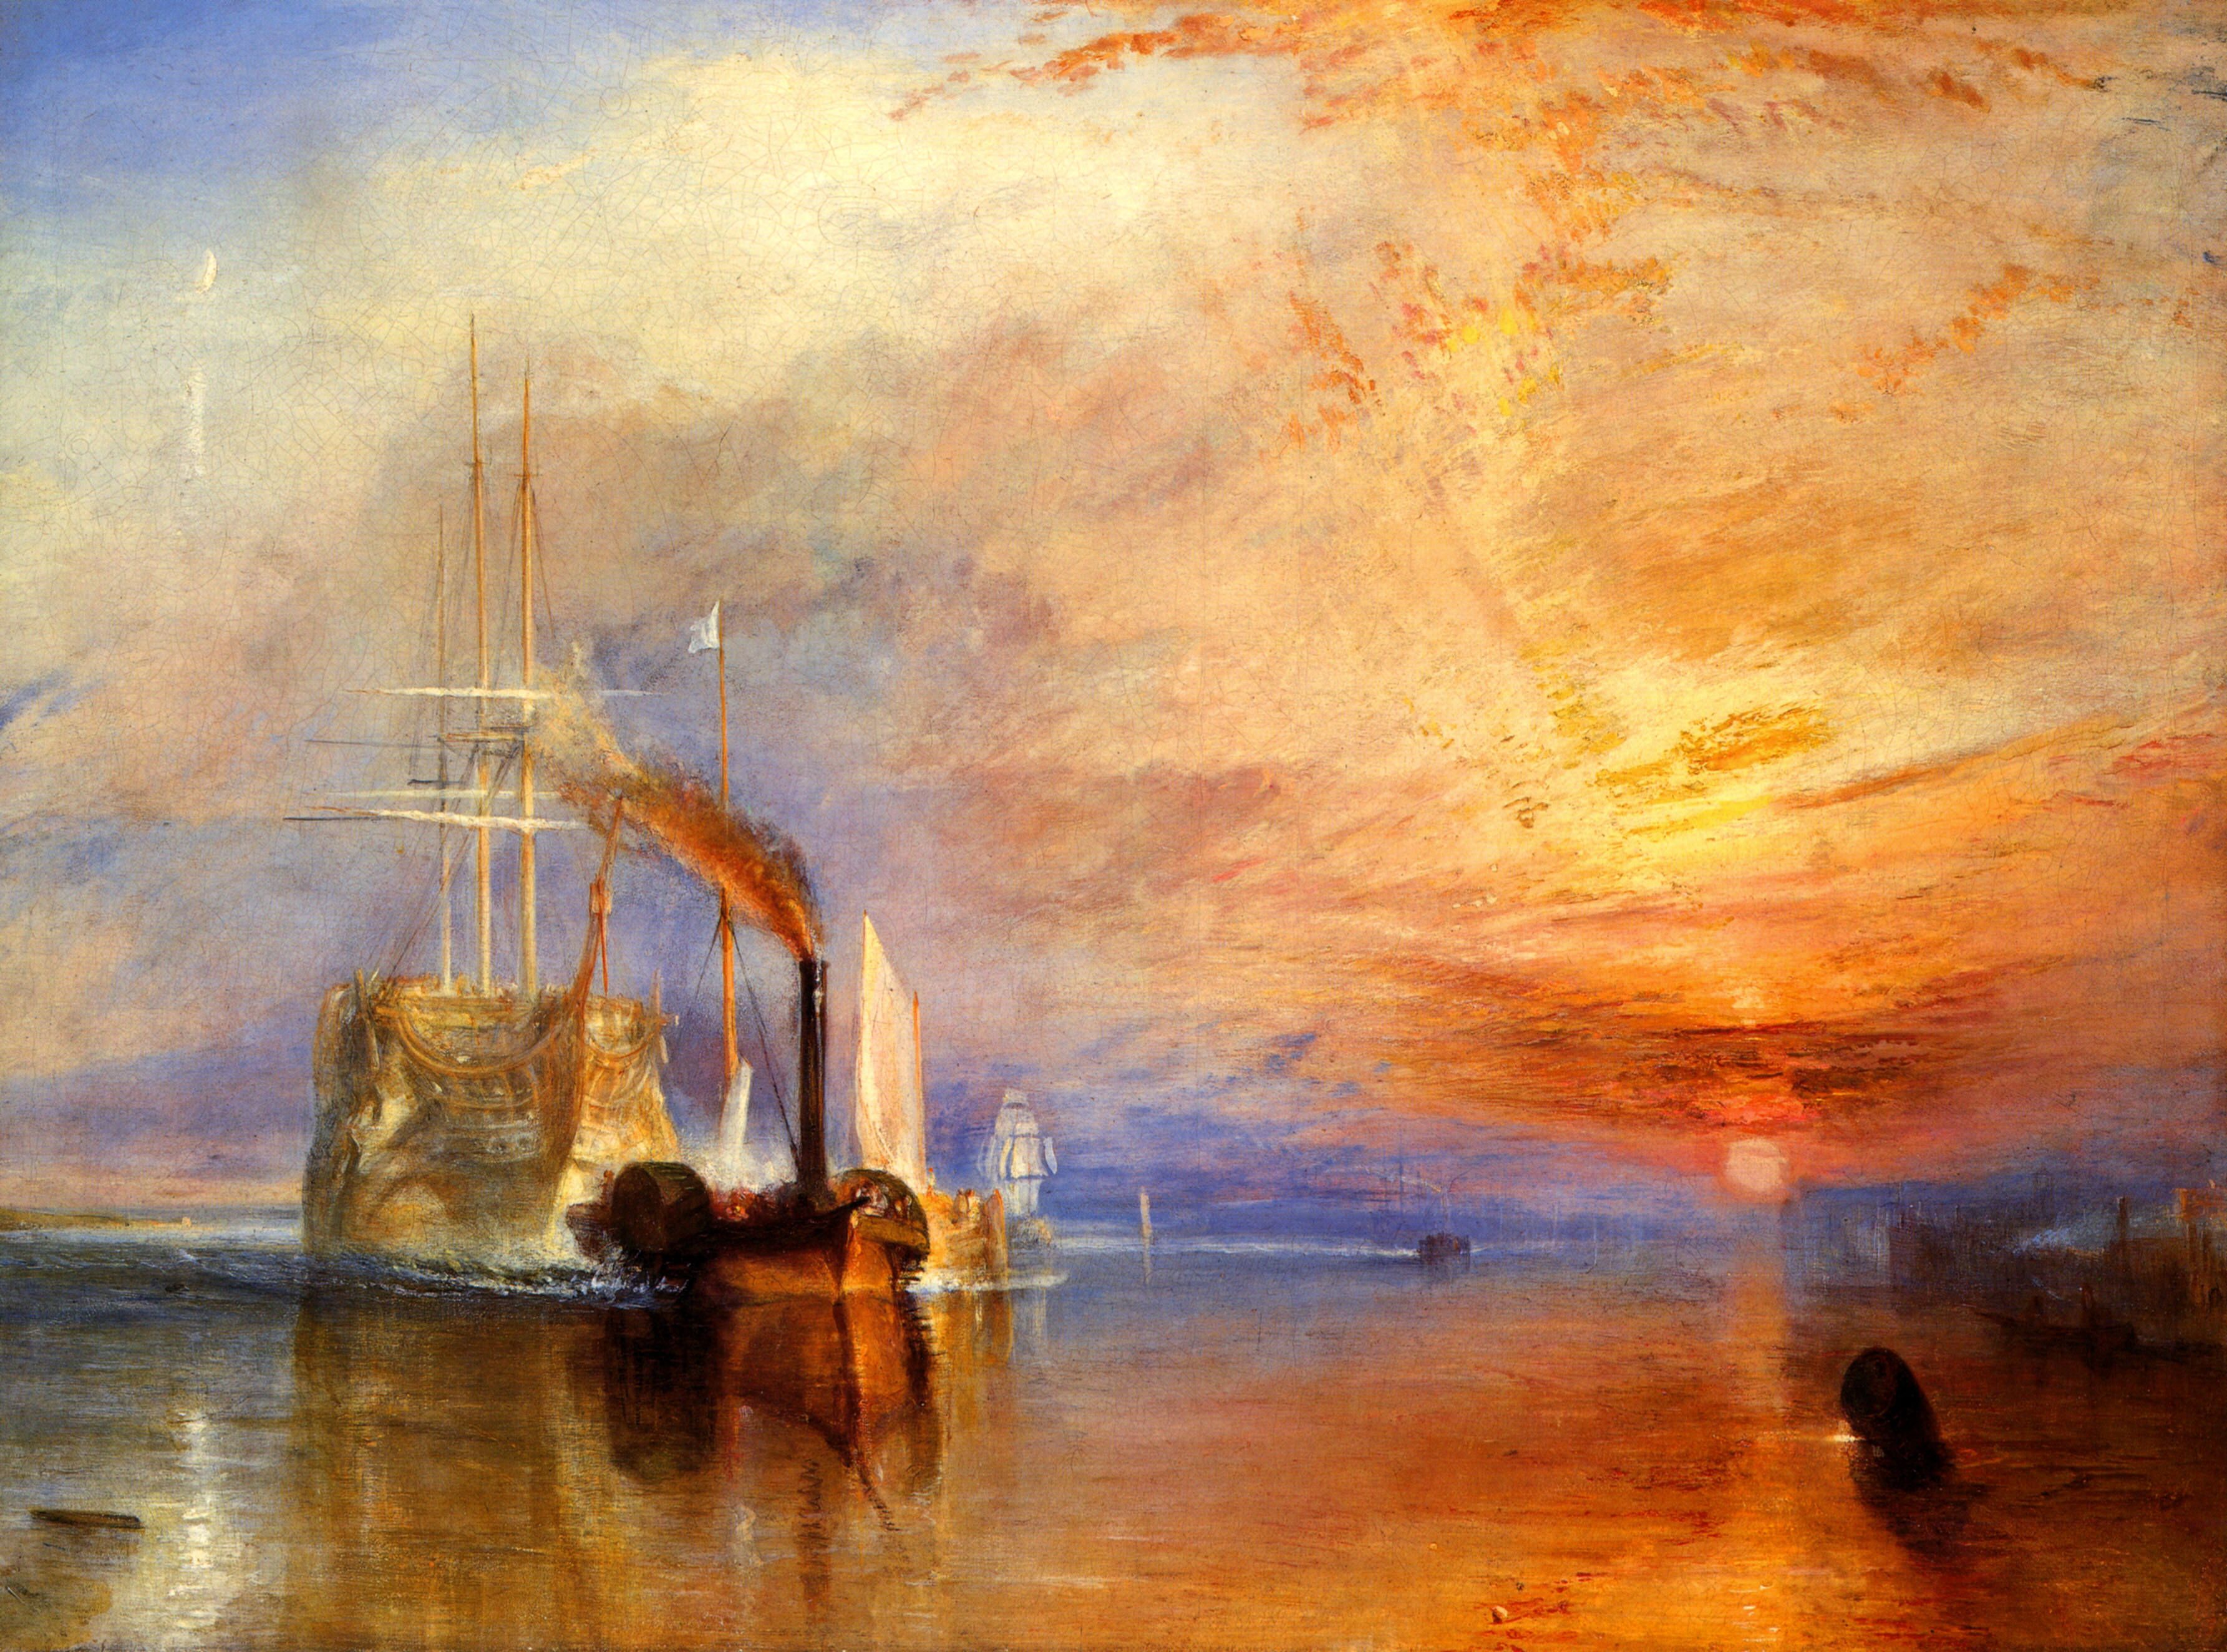 JMW Turner, The Fighting Temeraire Tugged to her last berth to be broke up